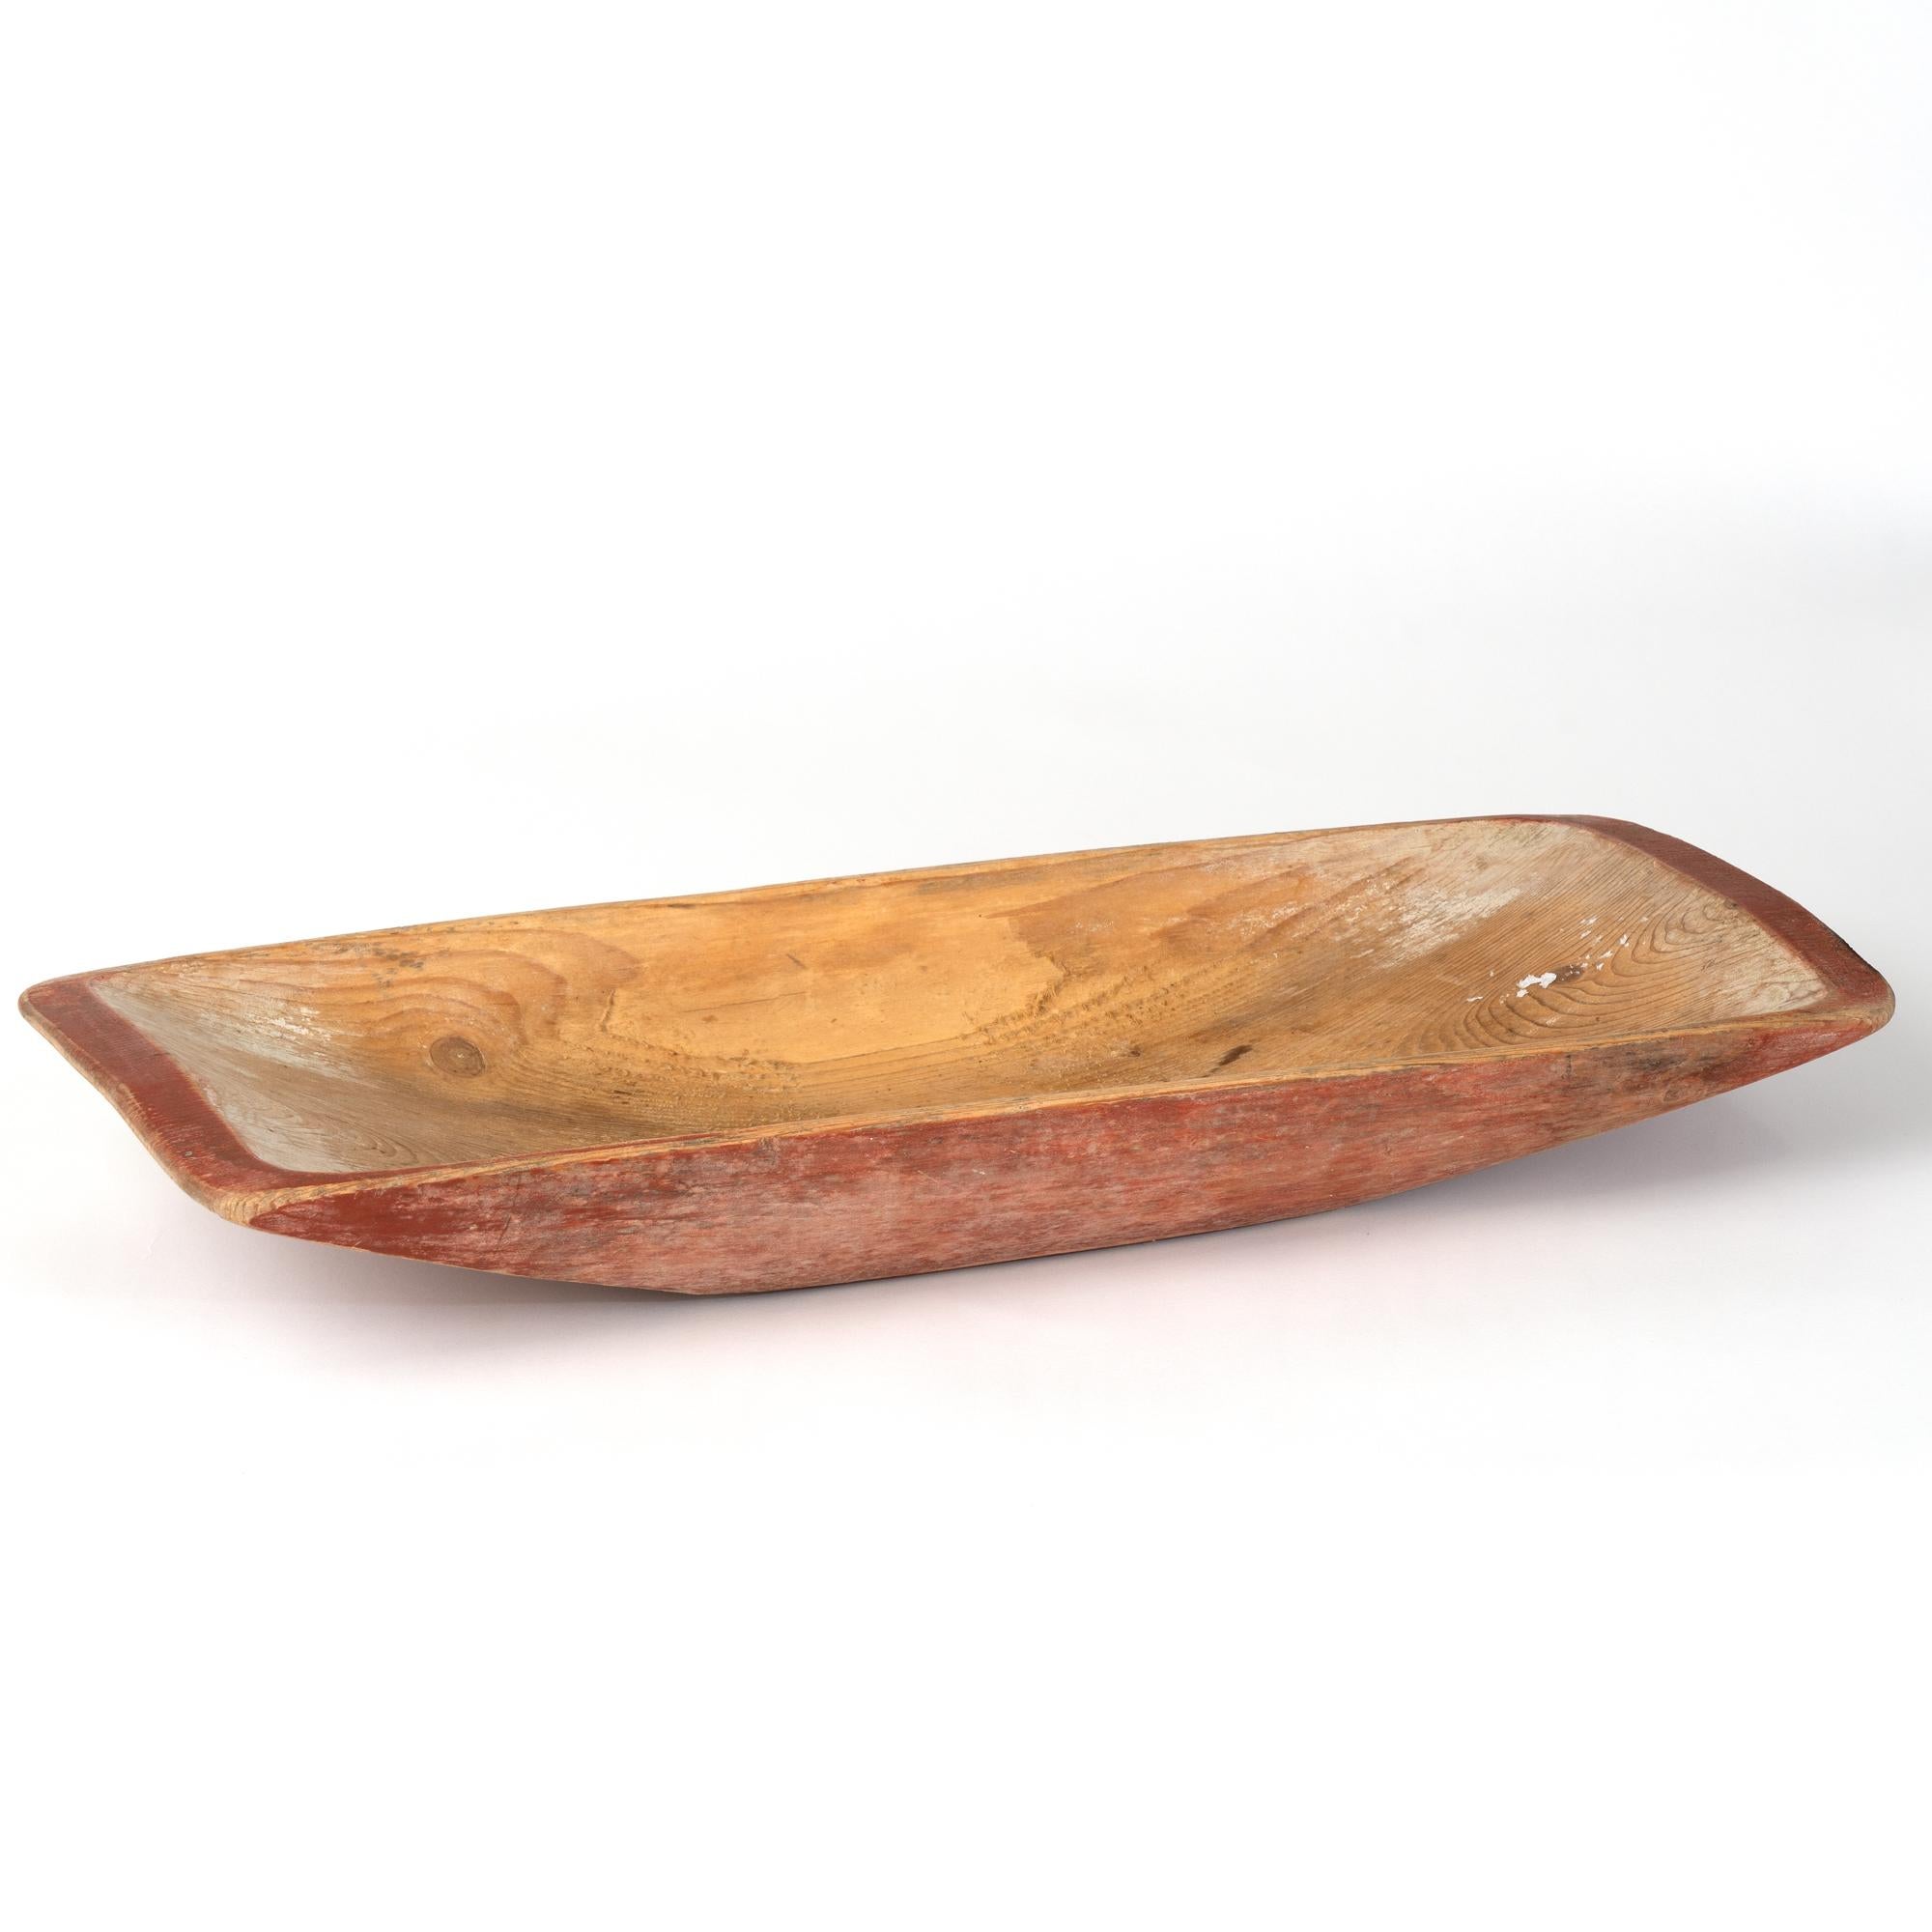 Original Swedish Folk Art carved pine wooden bowl with original red paint and warm patina. These bowls were used throughout families and often passed down generation to next generation. This bowl remains a highly functional item and now serve as a